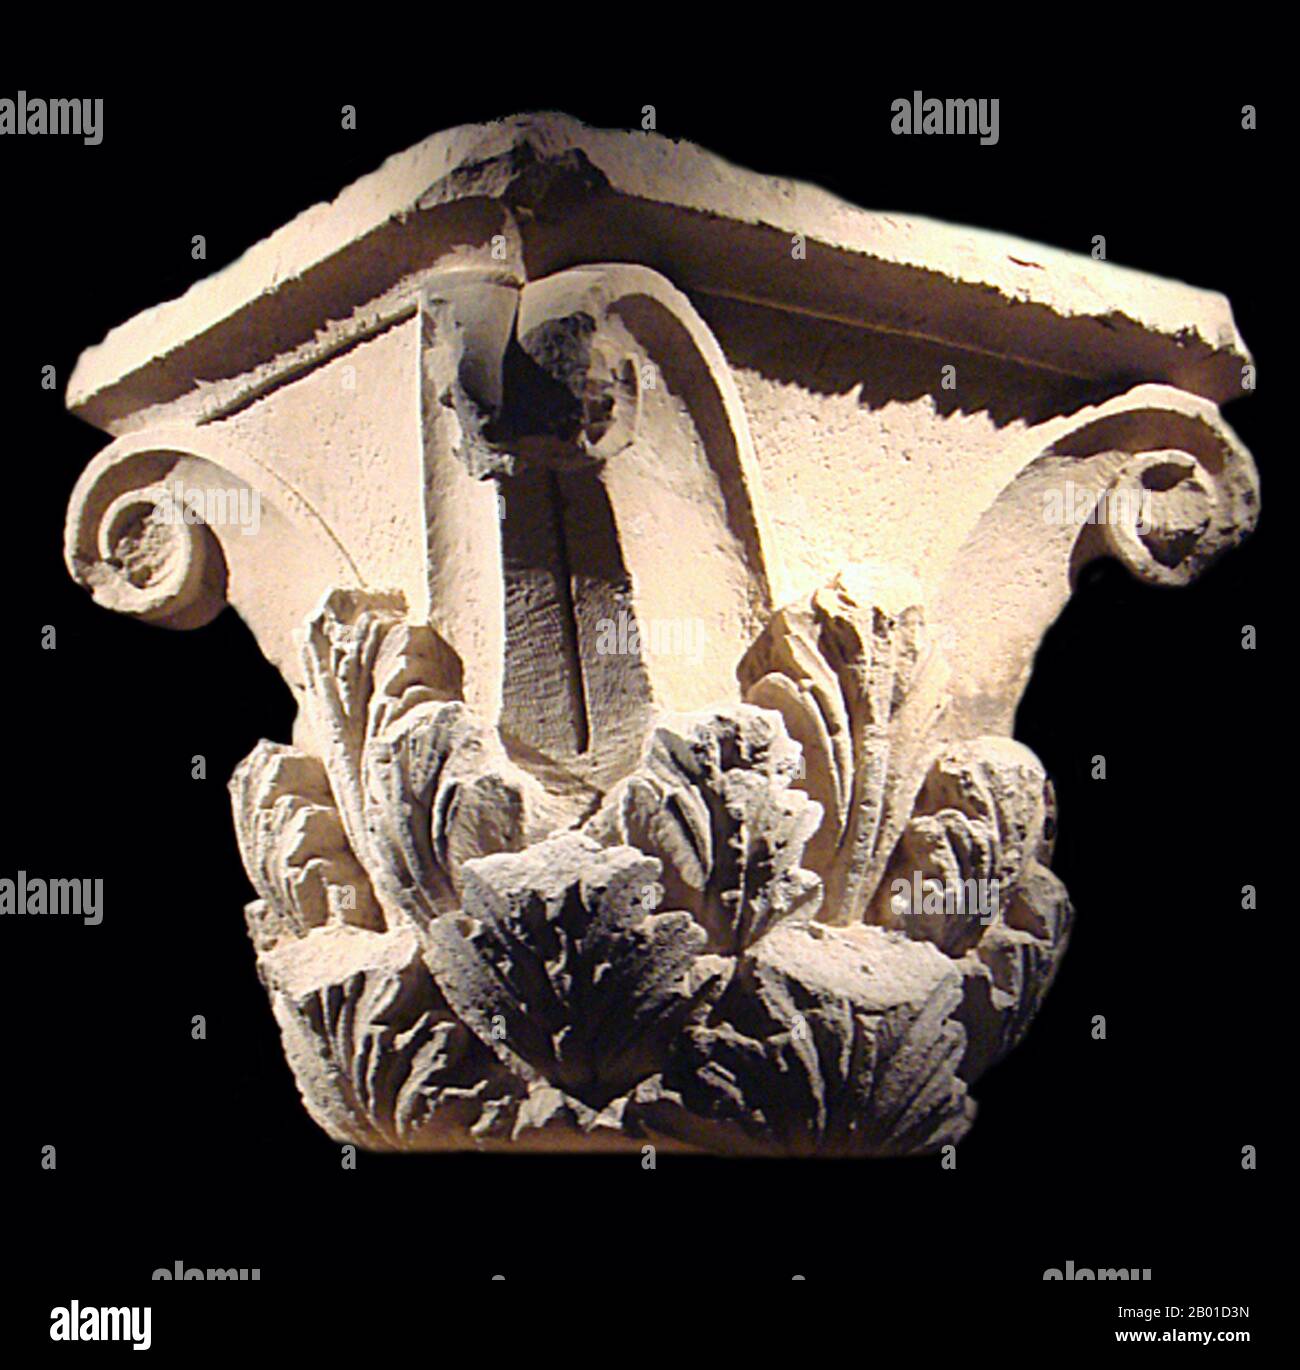 Afghanistan: A Greco-Gandharan 'Corinthian' column capital from the citadel at Ai-Khanoum, 3rd-2nd century BCE.  Ai-Khanoum or Ay Khanum ( 'Lady of the Moon' in Uzbek, probably the historical Alexandria on the Oxus, also possibly named Eucratidia), was founded in the 4th century BCE, following the conquests of Alexander the Great and was one of the primary cities of the Greco-Bactrian kingdom. The city is located in Kunduz Province northern Afghanistan, at the confluence of the Oxus river (today's Amu Darya) and the Kokcha river. Ai-Khanoum was one of the focal points of Hellenism in the East. Stock Photo